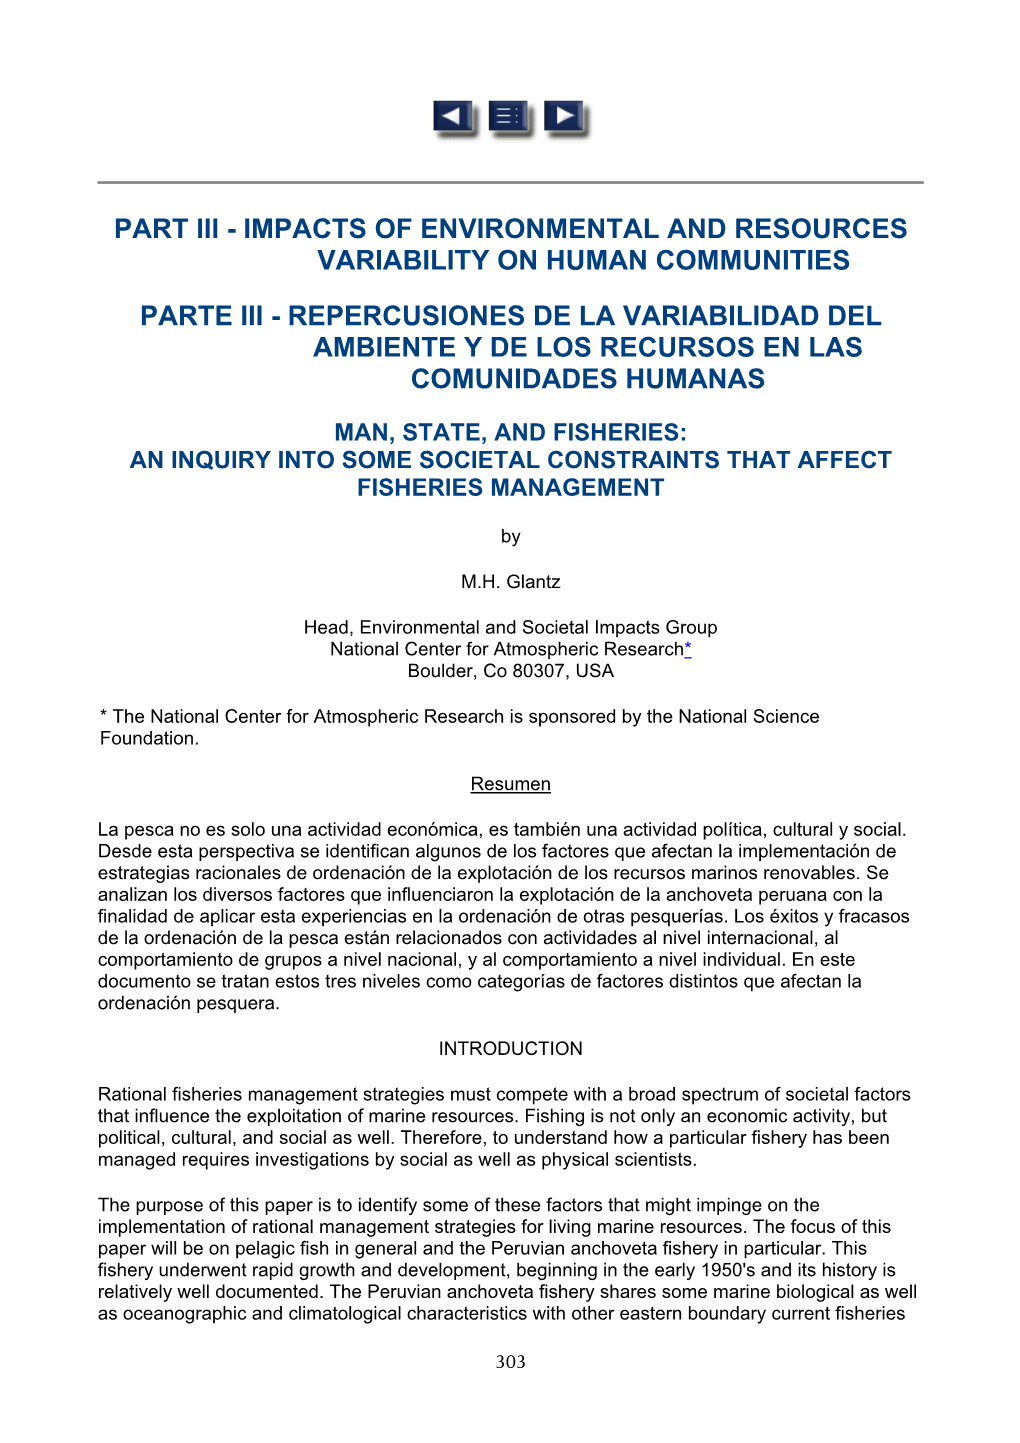 Impacts of Environmental and Resources Variability on Human Communities